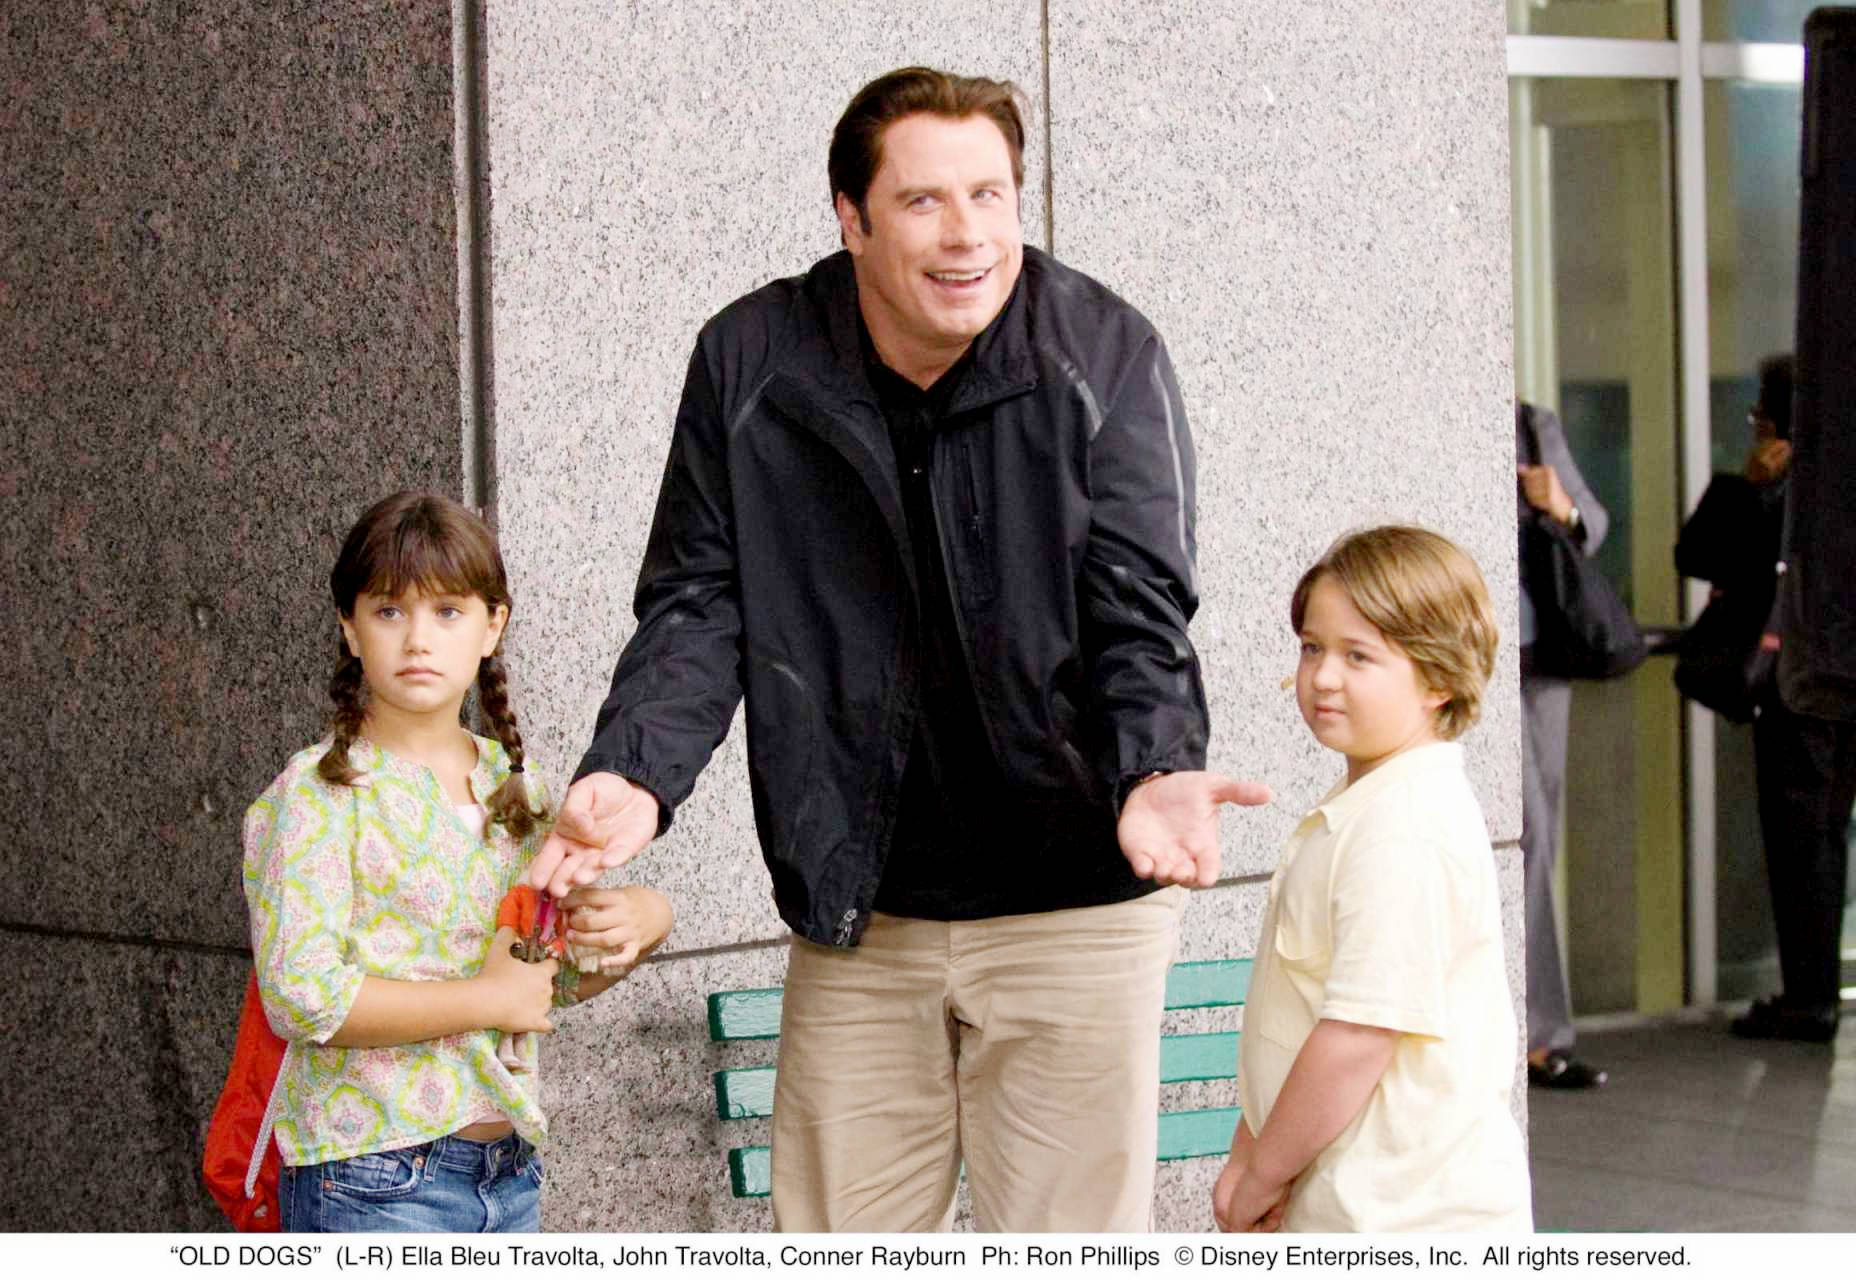 Ella Bleu Travolta, John Travolta and Conner Rayburn in Walt Disney Pictures' Old Dogs (2009). Photo credit by Ron Phillips.